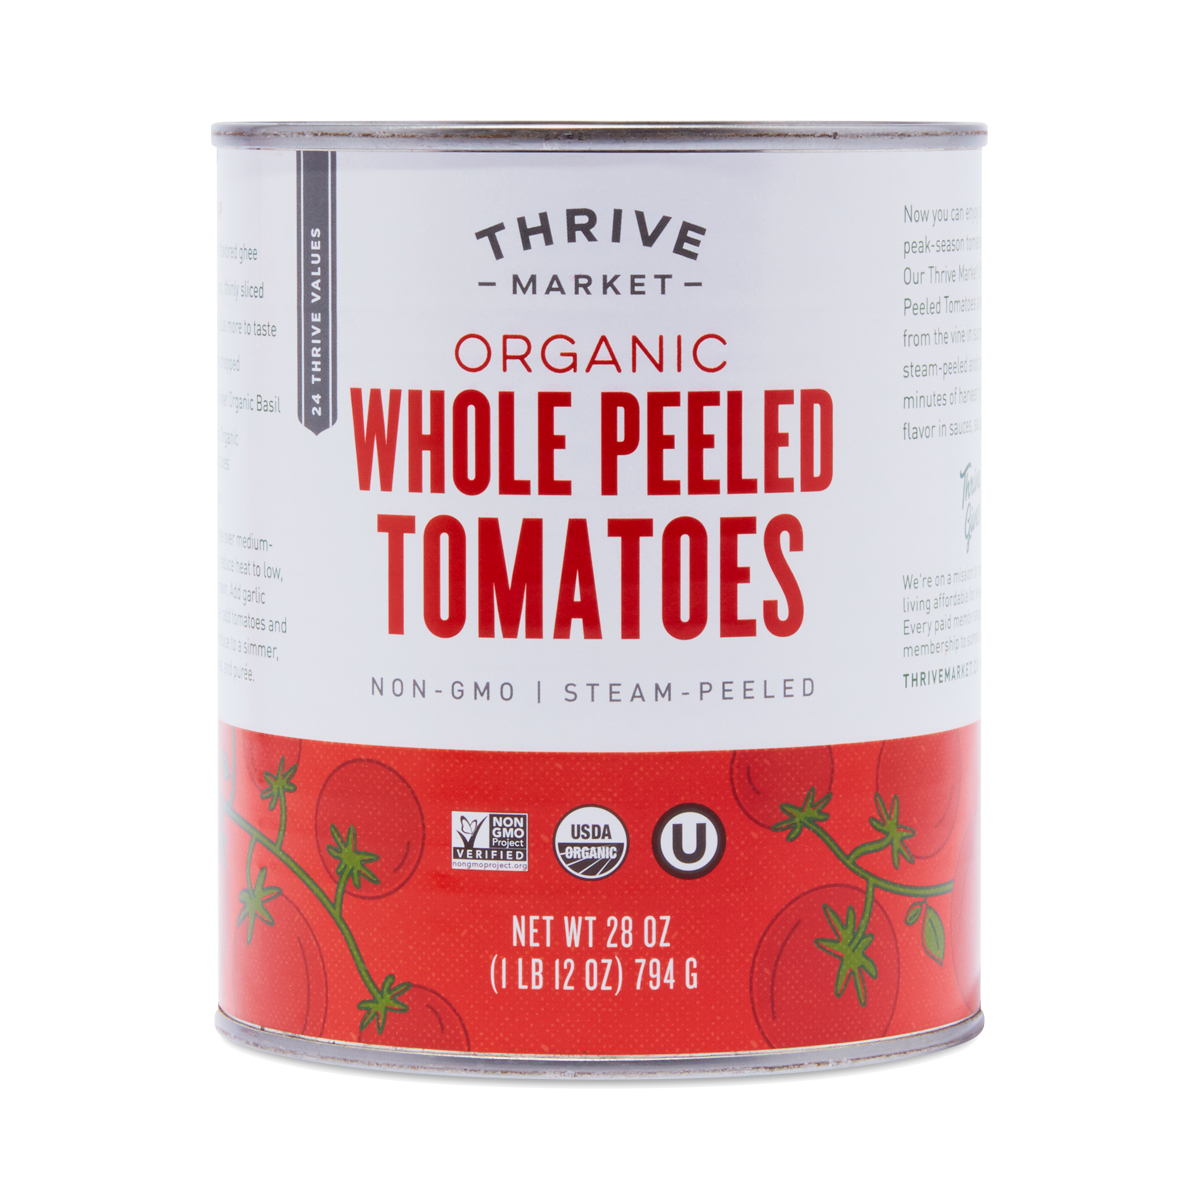 2-Pack Thrive Market Organic Whole Peeled Tomatoes 28 oz can